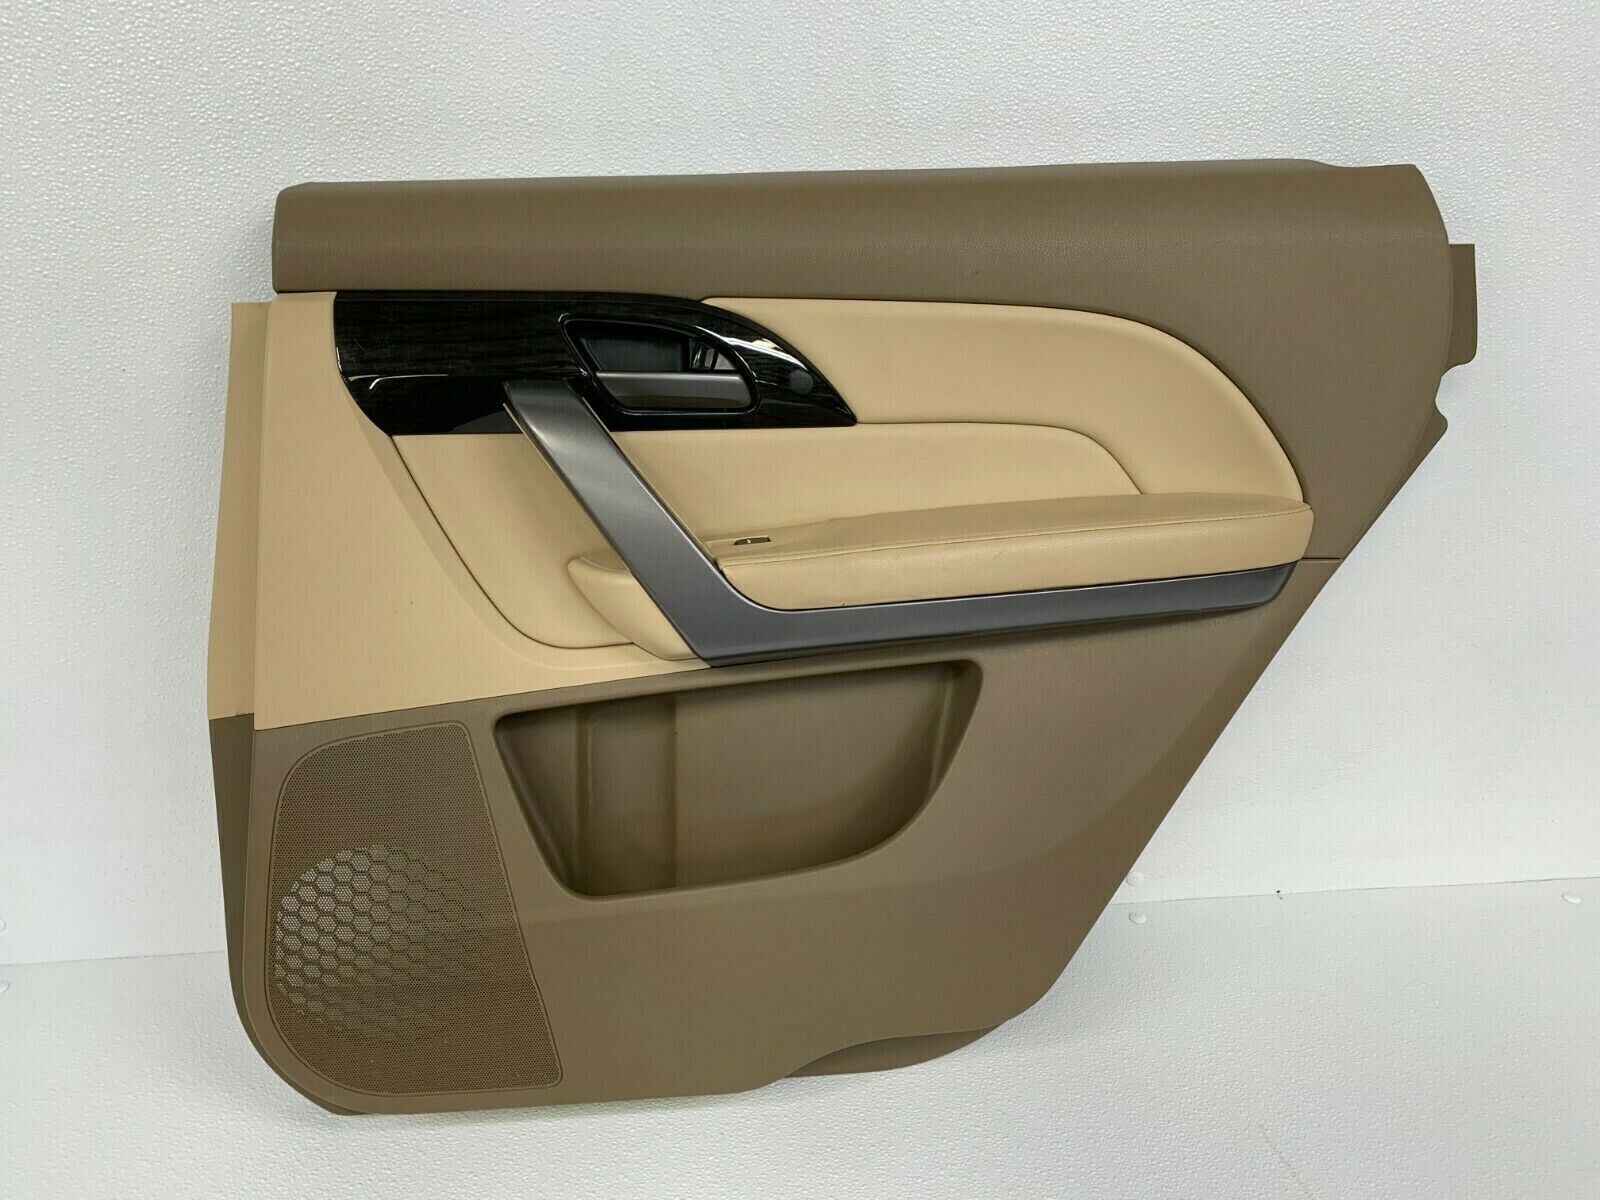 ⭐2007-2009 ACURA MDX REAR RIGHT SIDE INTERIOR DOOR PANEL PARCHMENT OEM LOT2183